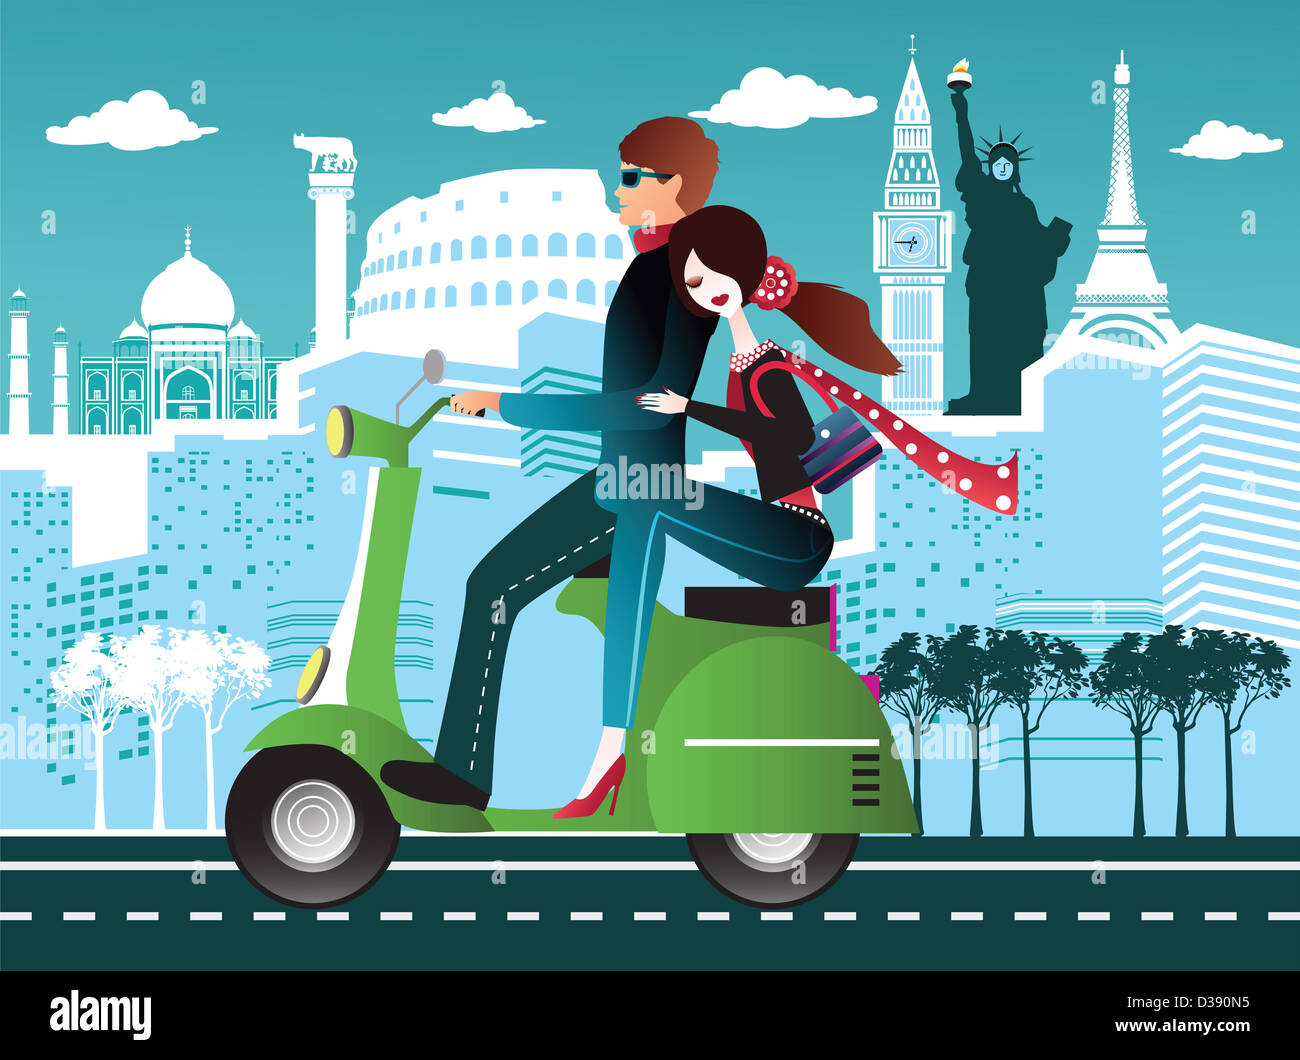 Couple riding a scooter with some international tourist attractions in the background Stock Photo